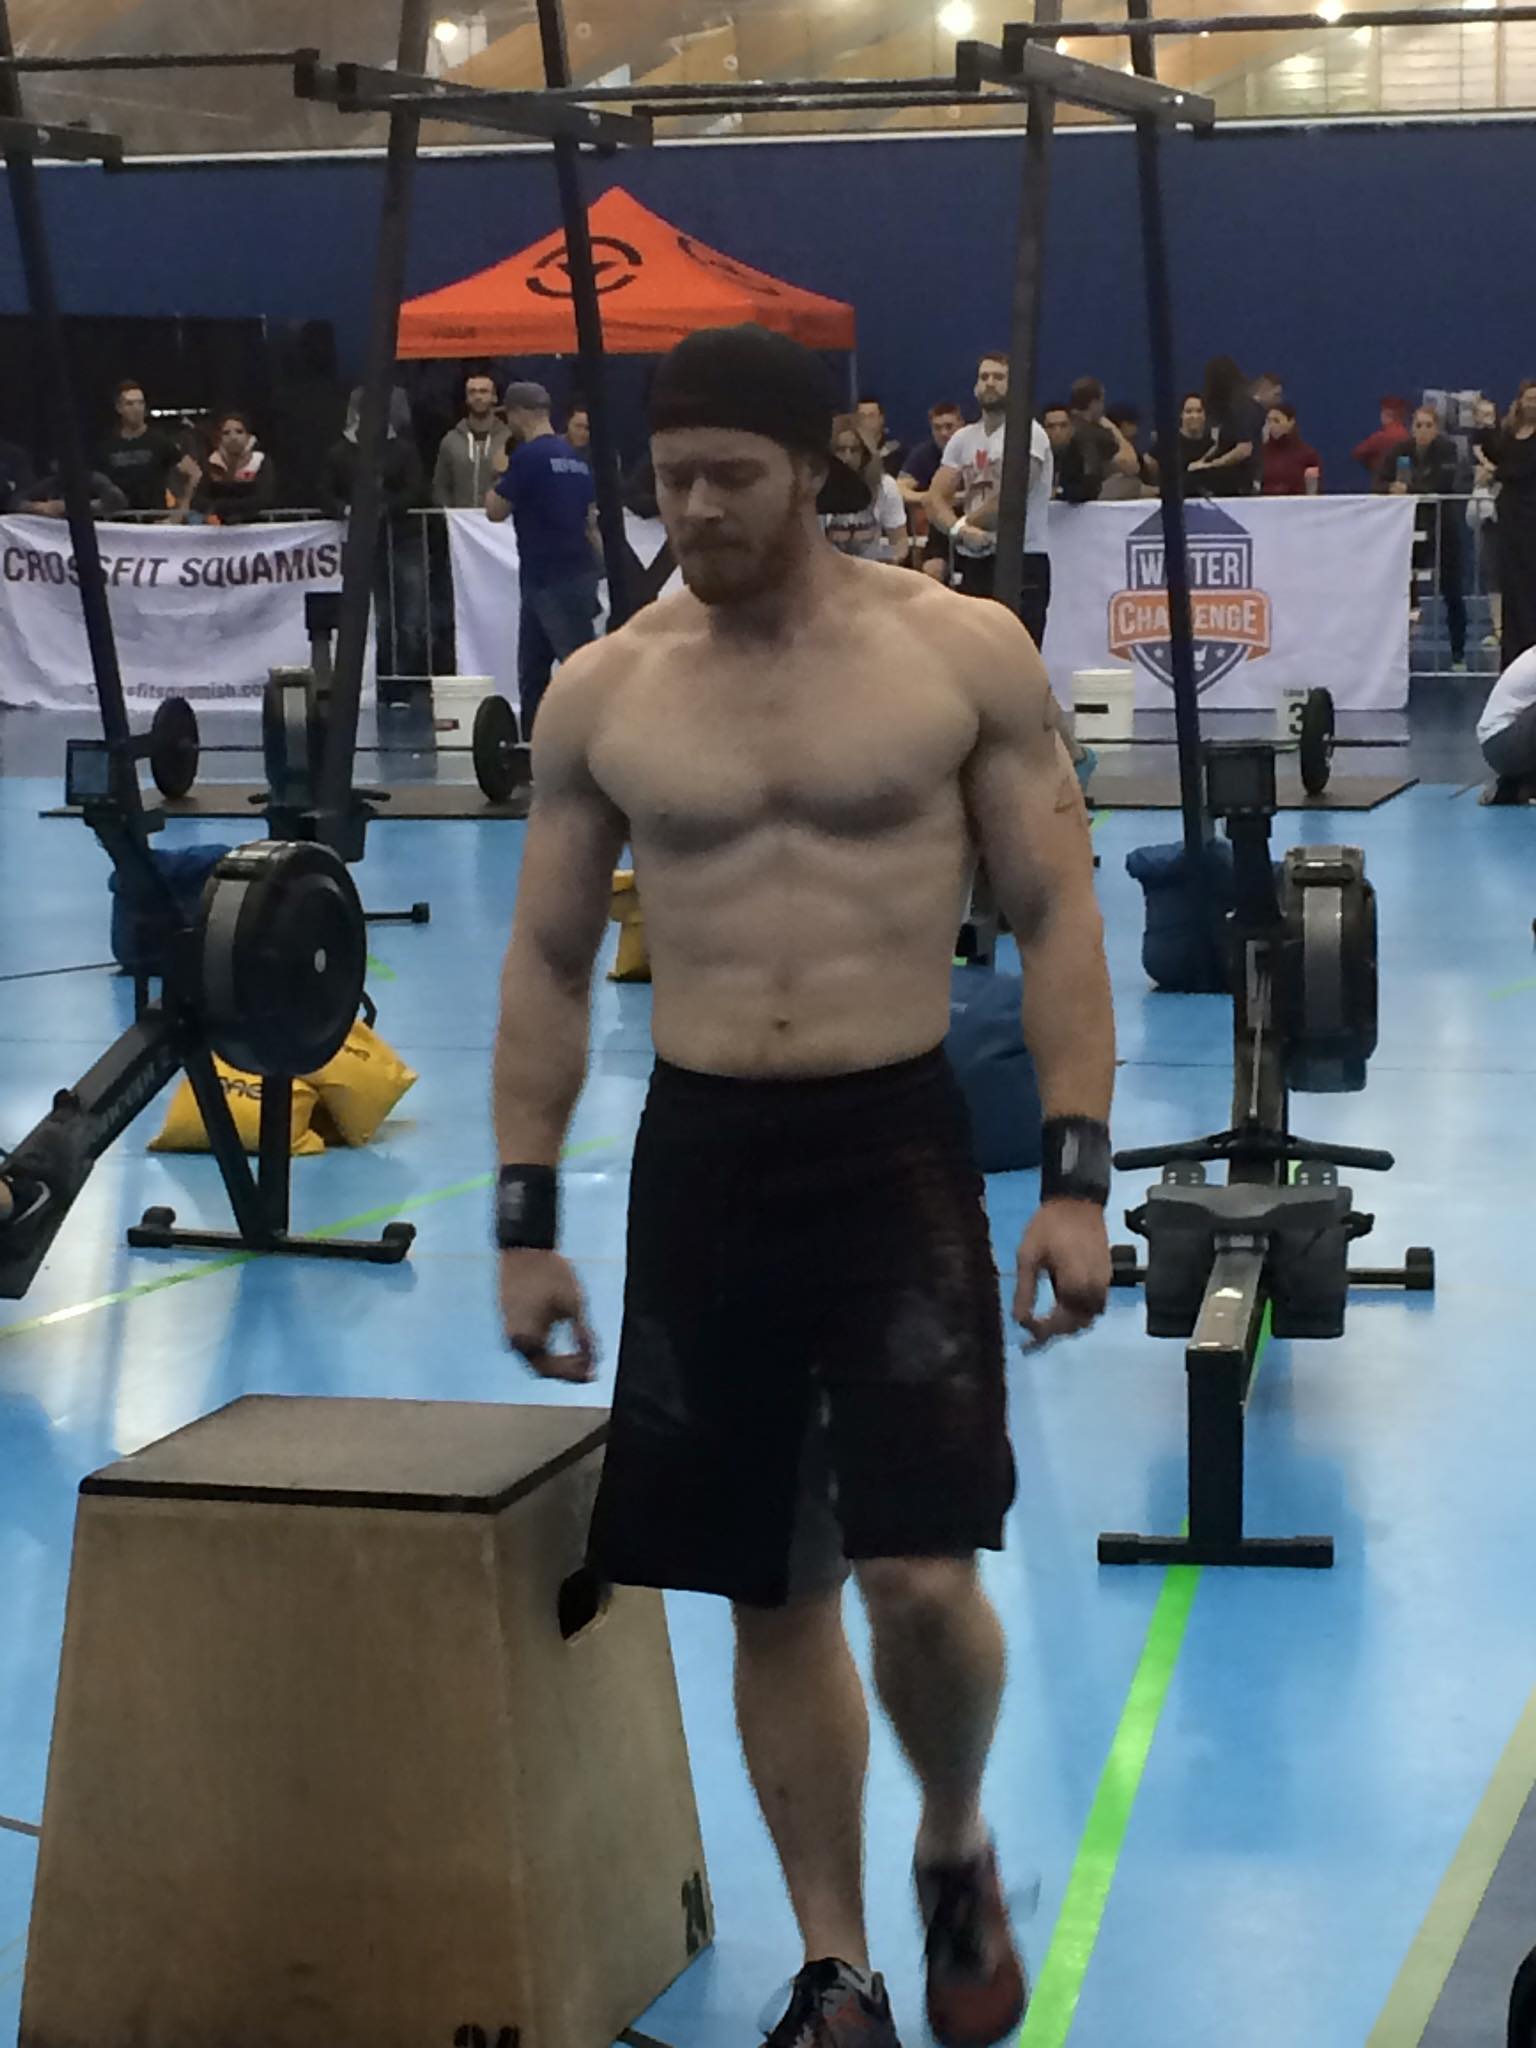 Andy competing in Crossfit, Vancouver